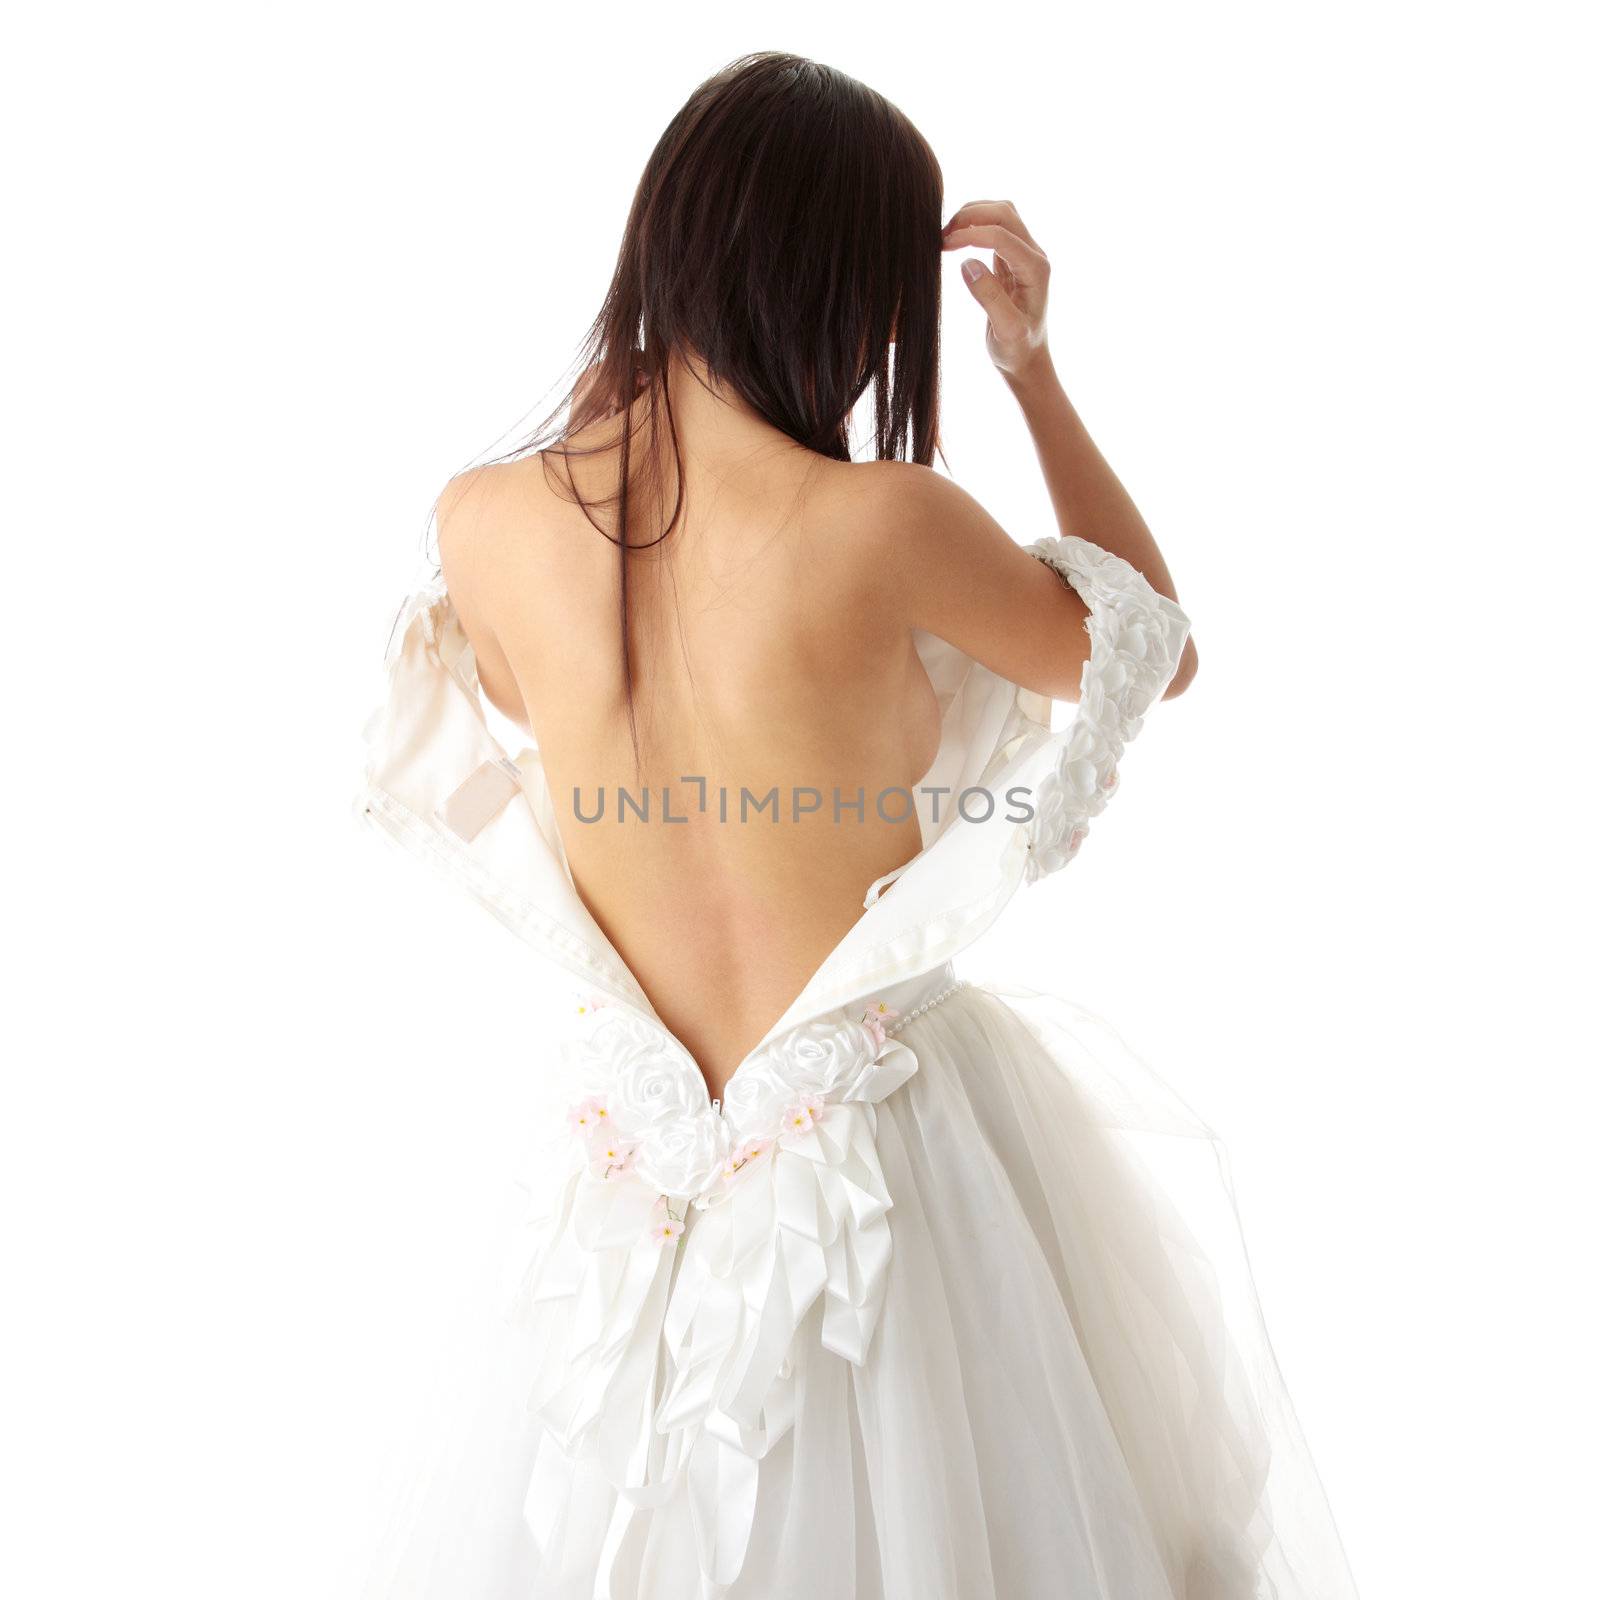 Bride dressing up her wedding dress on nude body, isolated